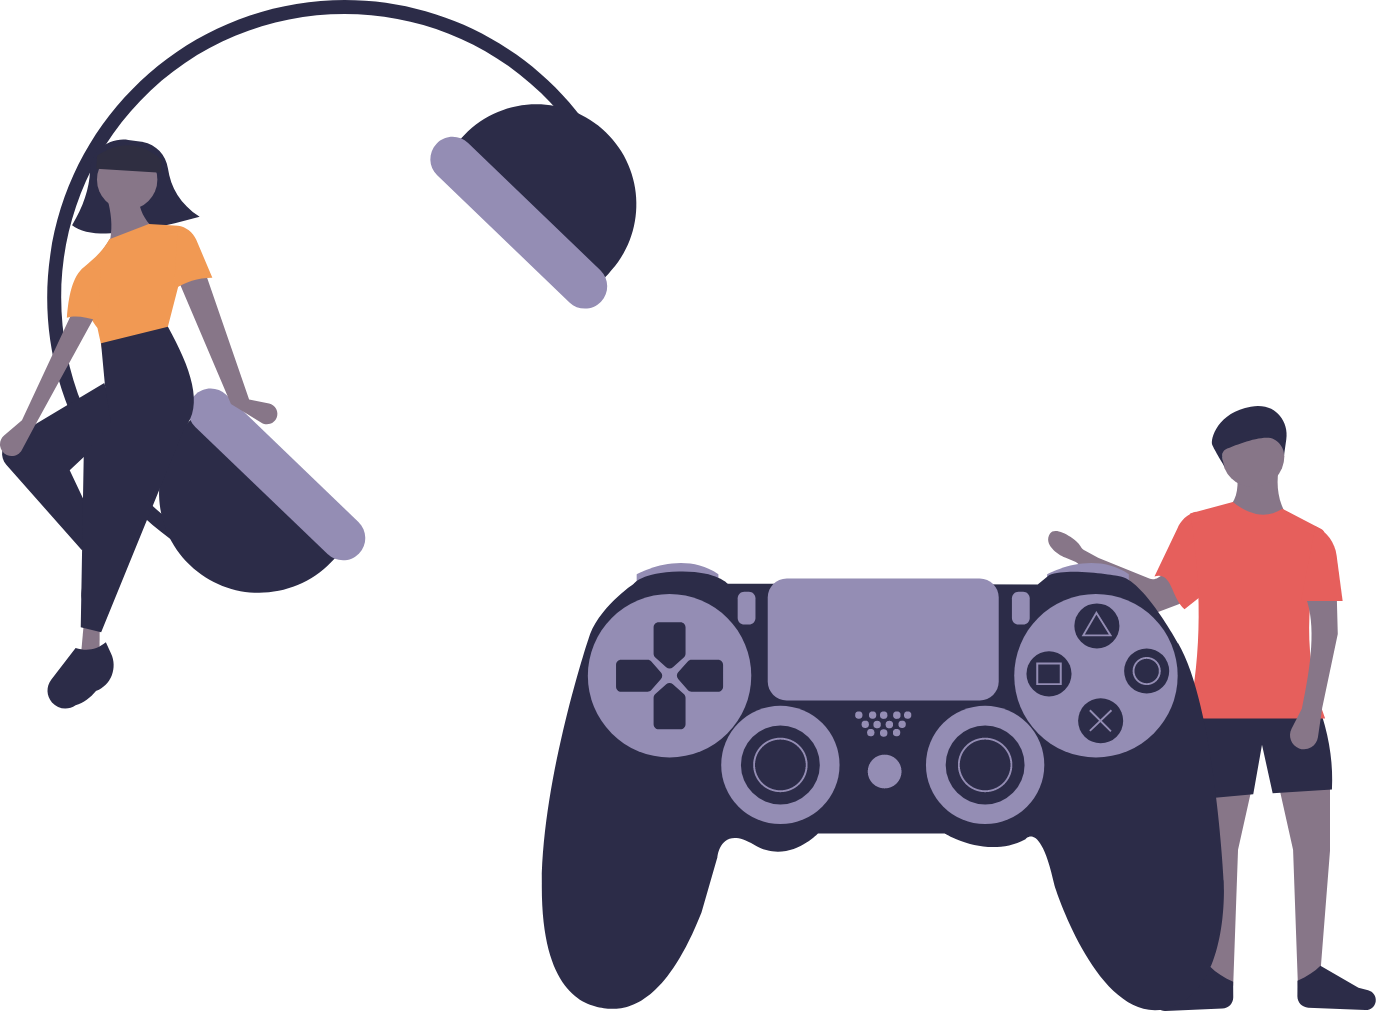 Illustration of a black woman sitting on headphones and a black man standing beside a playstation game controller